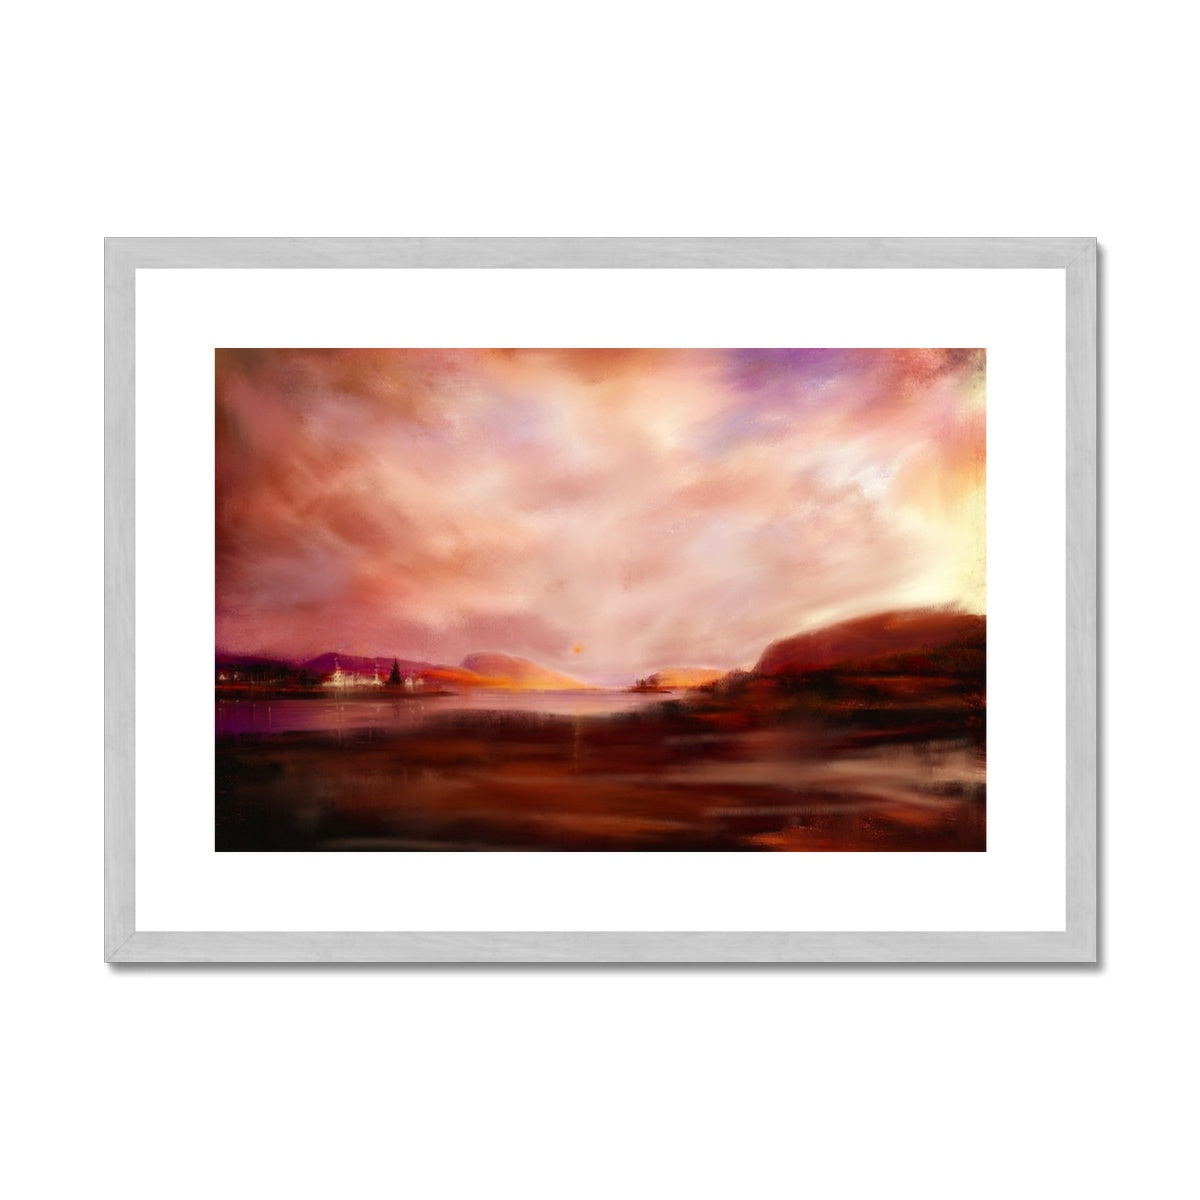 Plockton Sunset Painting | Antique Framed & Mounted Prints From Scotland-Antique Framed & Mounted Prints-Scottish Highlands & Lowlands Art Gallery-A2 Landscape-Silver Frame-Paintings, Prints, Homeware, Art Gifts From Scotland By Scottish Artist Kevin Hunter